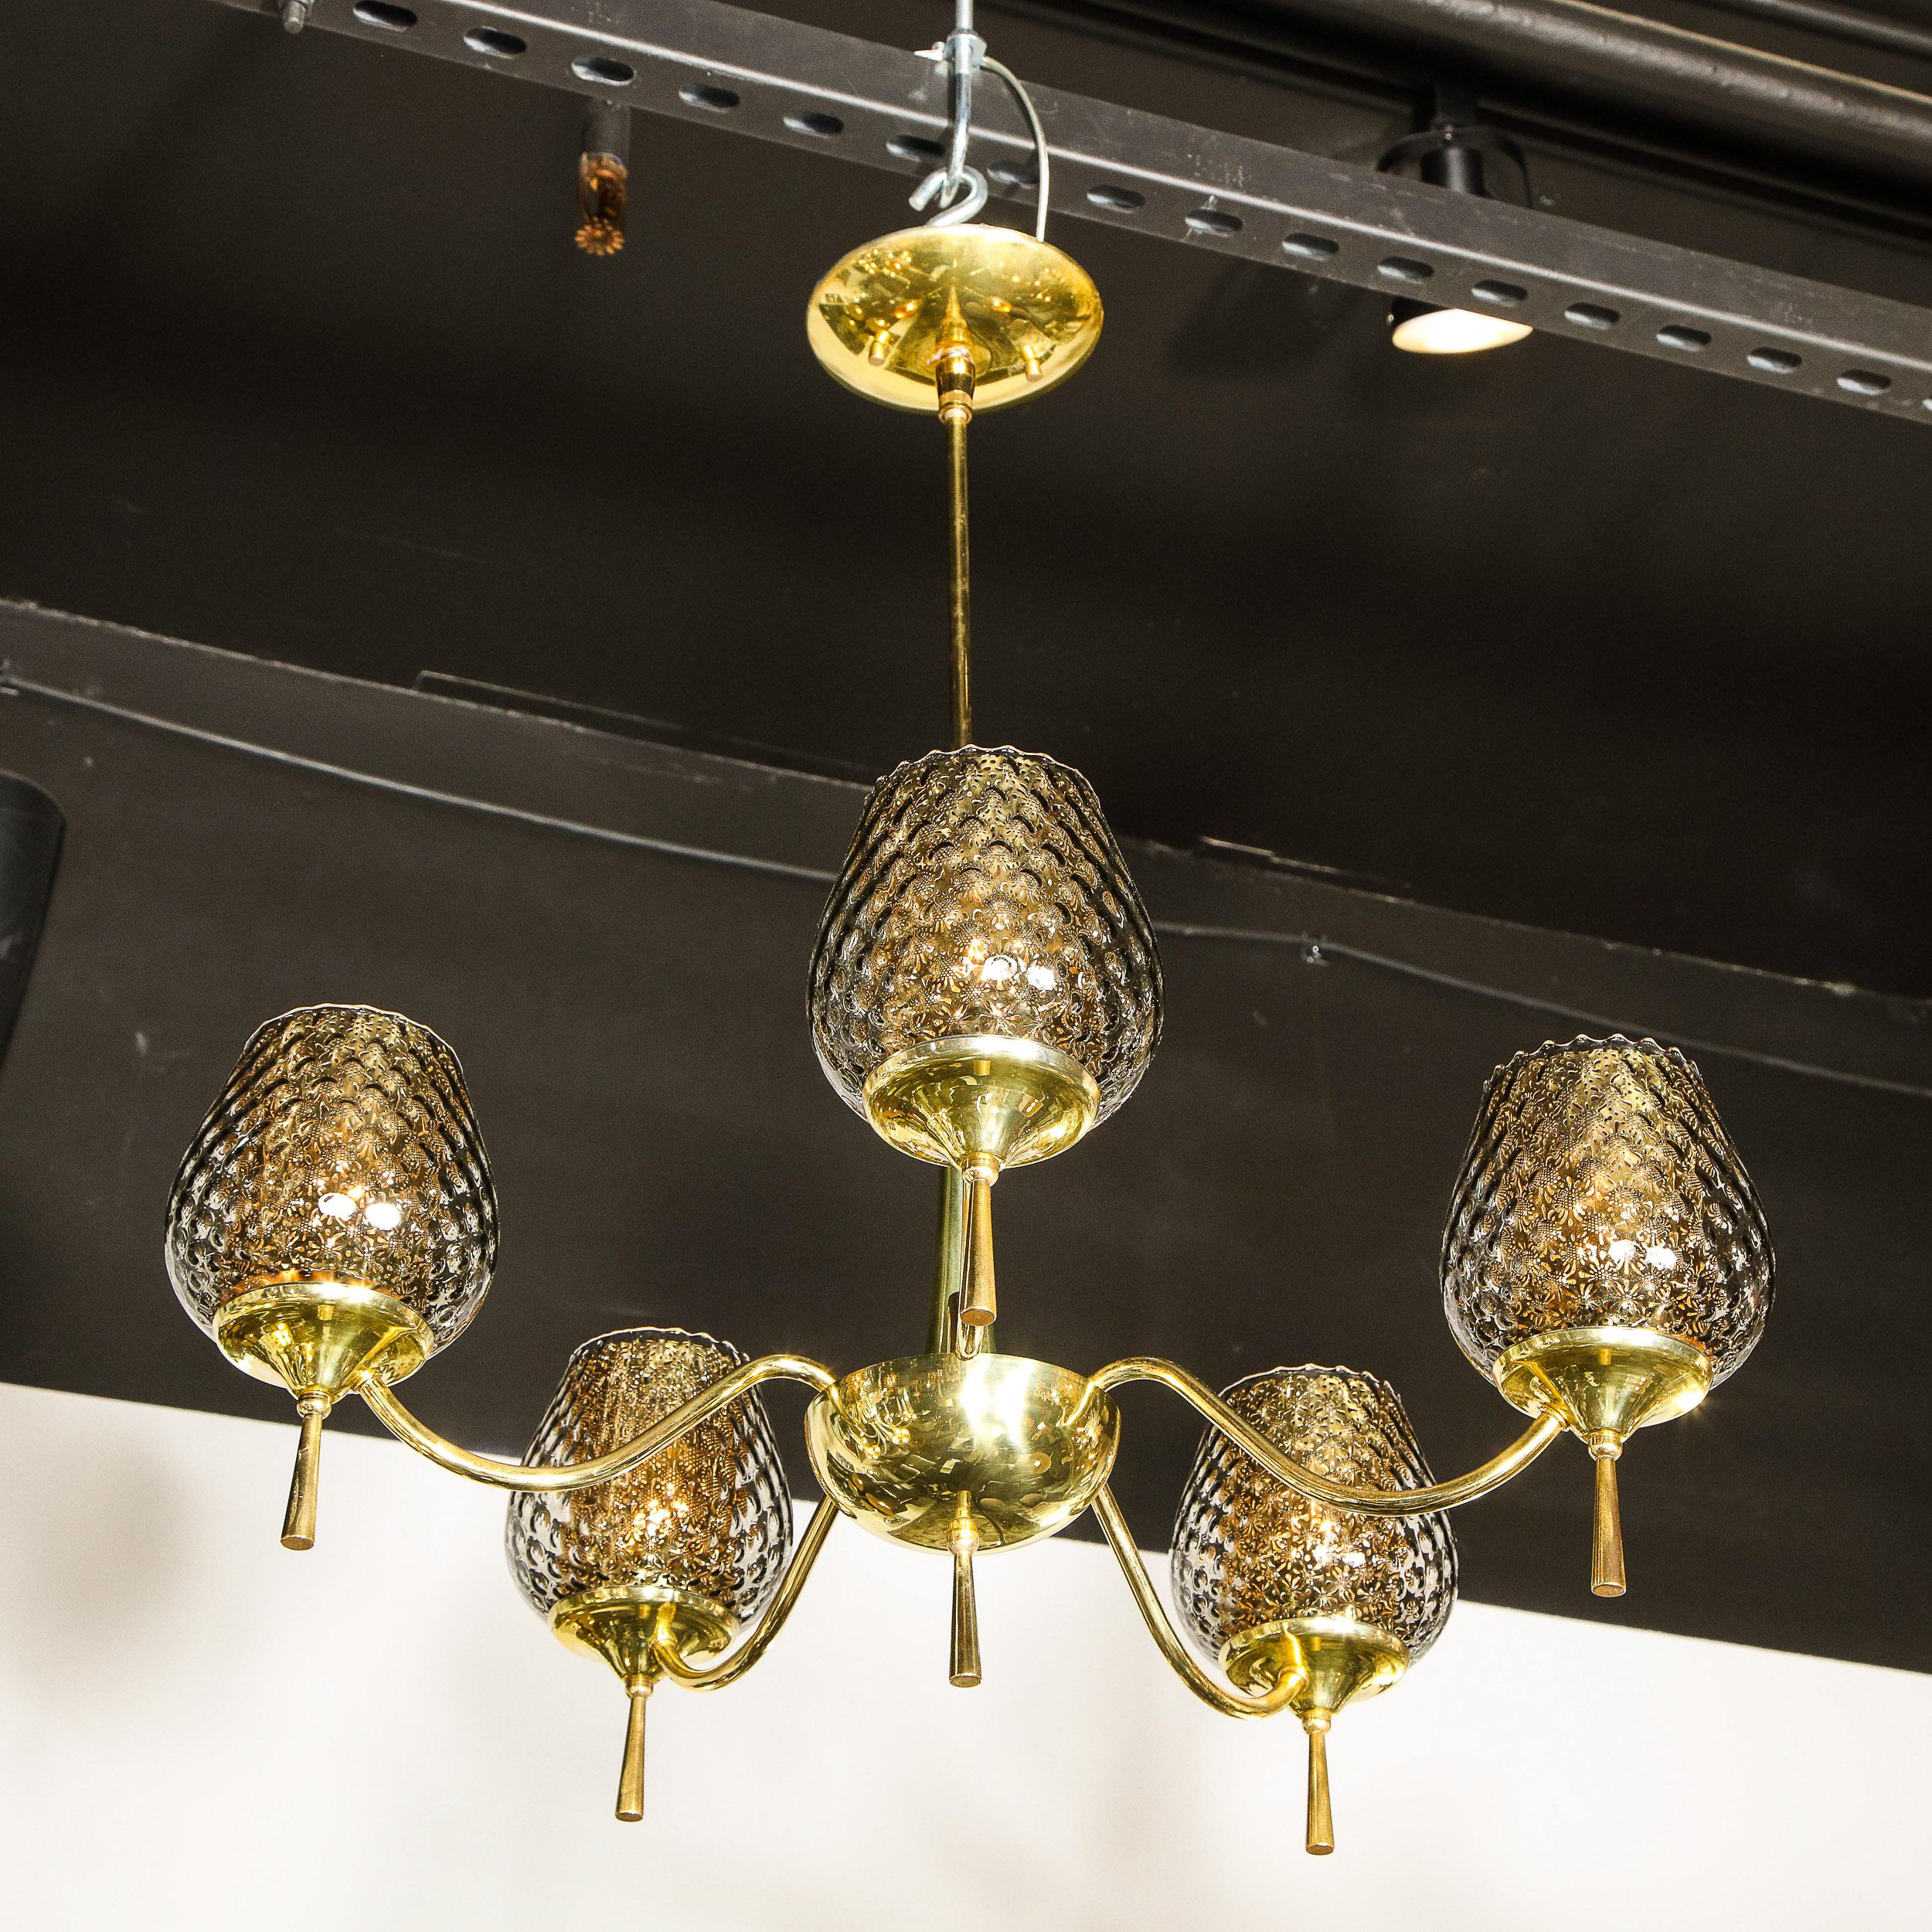 This stunning Mid Century Modern chandelier was realized in Murano, Italy- the island off the coast of Venice renowned for centuries for its superlative glass production, circa 1960. It features a brass hourglass form body that connects to domed